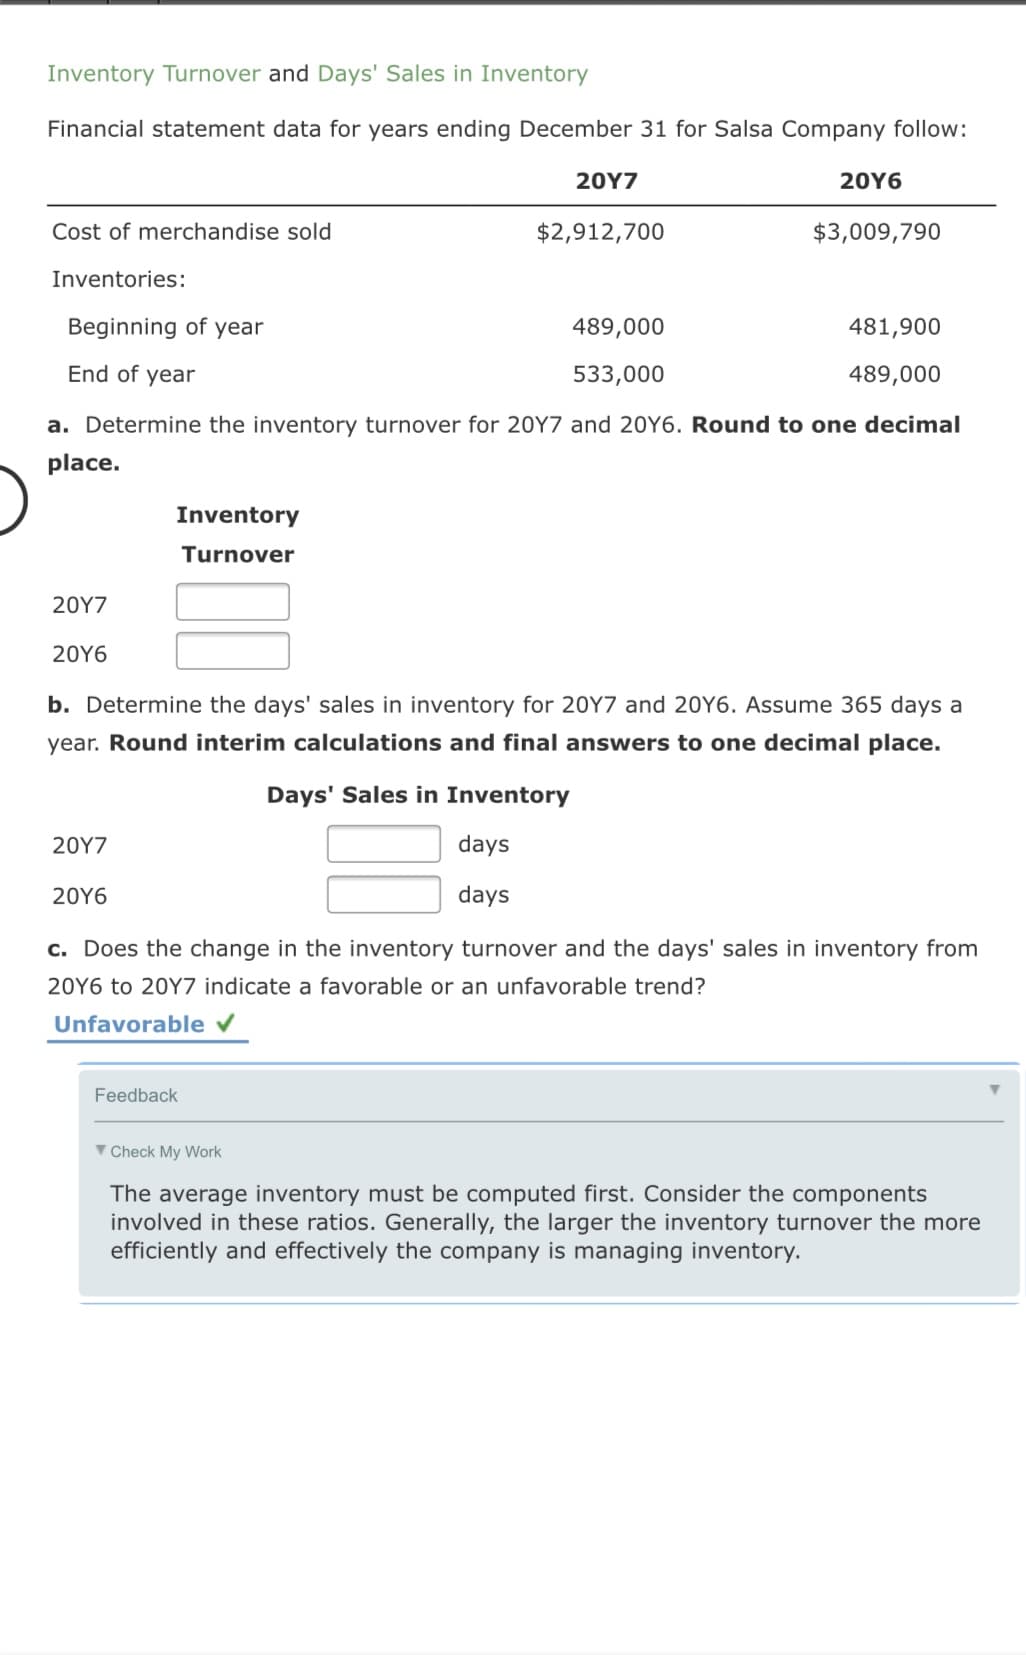 Inventory Turnover and Days' Sales in Inventory
Financial statement data for years ending December 31 for Salsa Company follow:
20Y7
20Υ6
Cost of merchandise sold
$2,912,700
$3,009,790
Inventories:
Beginning of year
489,000
481,900
End of year
533,000
489,000
a. Determine the inventory turnover for 20Y7 and 20Y6. Round to one decimal
place.
Inventory
Turnover
20Υ7
20Υ6
b. Determine the days' sales in inventory for 20Y7 and 20Y6. Assume 365 days a
year. Round interim calculations and final answers to one decimal place.
Days' Sales in Inventory
20Υ7
days
20Y6
days
c. Does the change in the inventory turnover and the days' sales in inventory from
20Y6 to 20Y7 indicate a favorable or an unfavorable trend?
Unfavorable v
Feedback
V Check My Work
The average inventory must be computed first. Consider the components
involved in these ratios. Generally, the larger the inventory turnover the more
efficiently and effectively the company is managing inventory.
